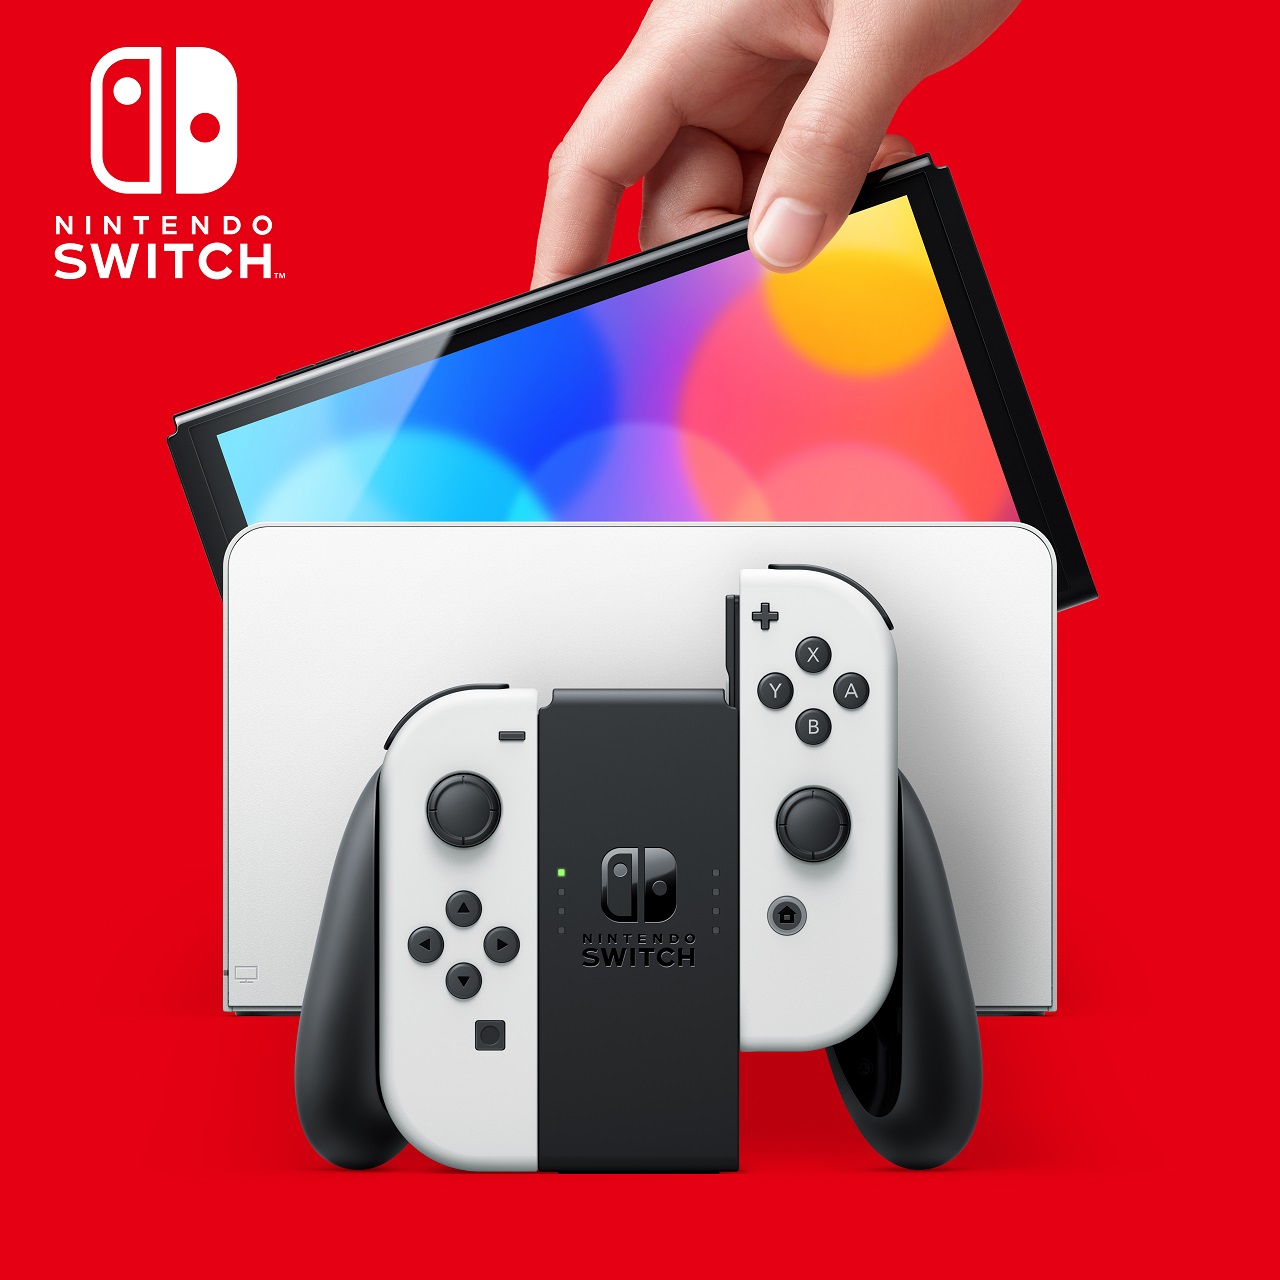 VGChartz on Twitter: "Nintendo Switch (OLED Model) - October 8 for $349.99  - 7-inch OLED screen - new dock with wired LAN port - 64 GB of internal  storage - Enhanced audio